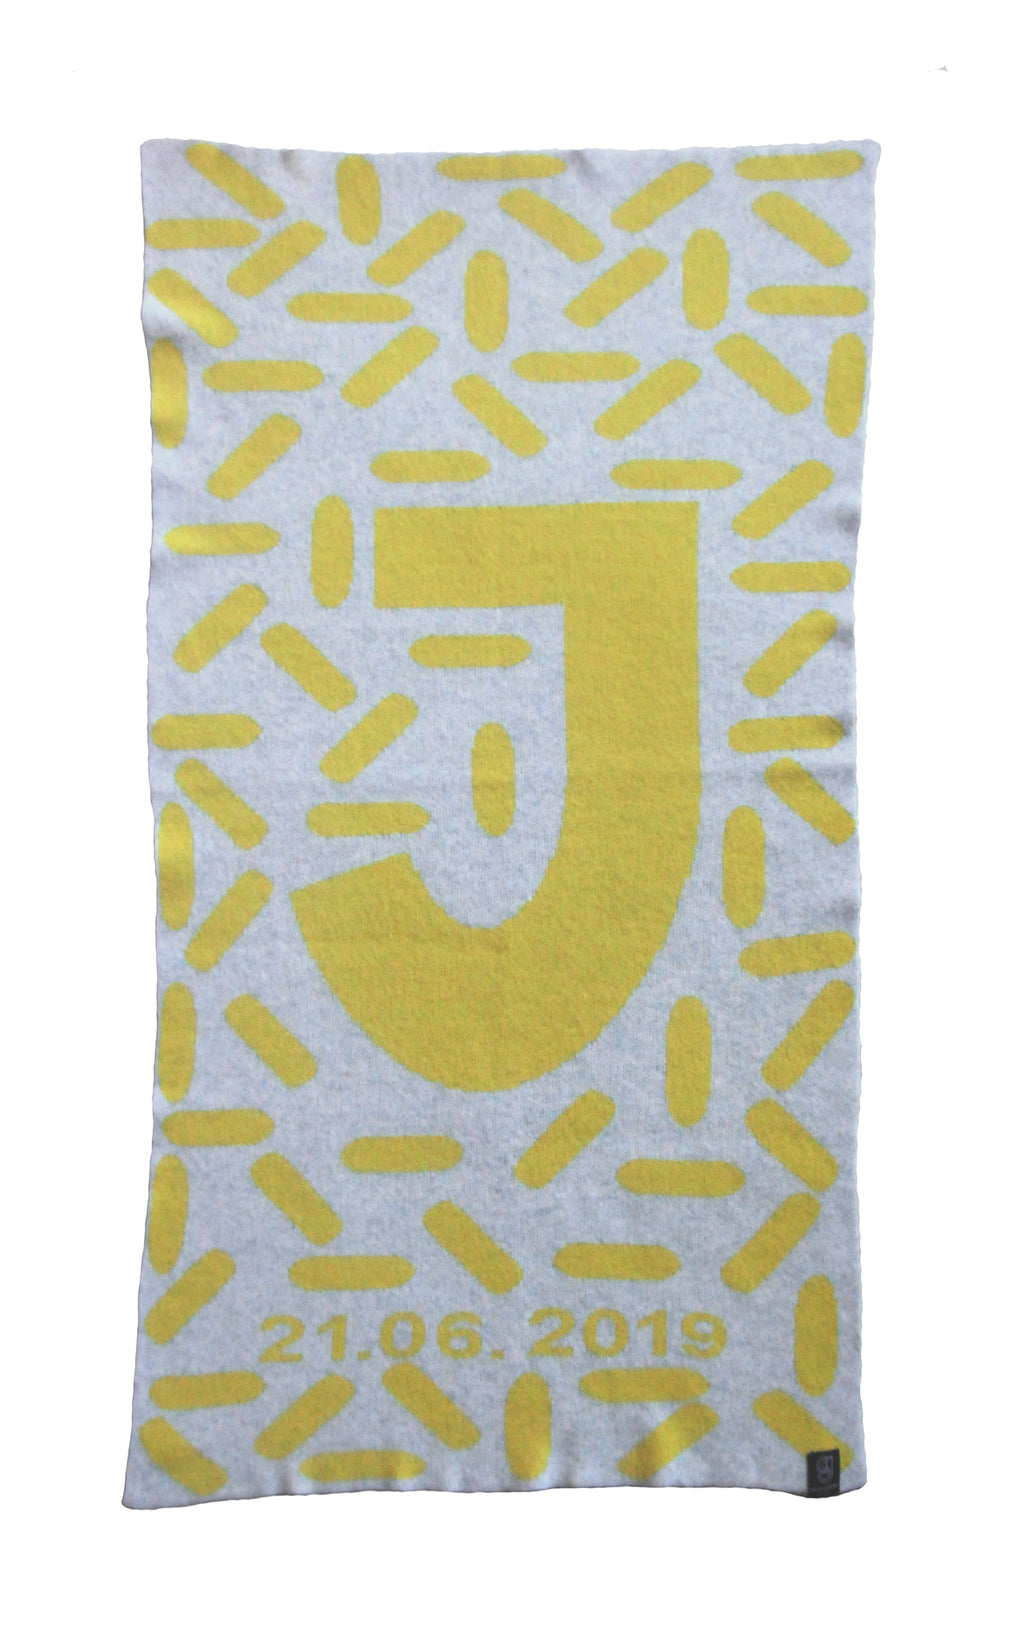 D.O.B ALPHABET BLANKET IN GREY AND YELLOW